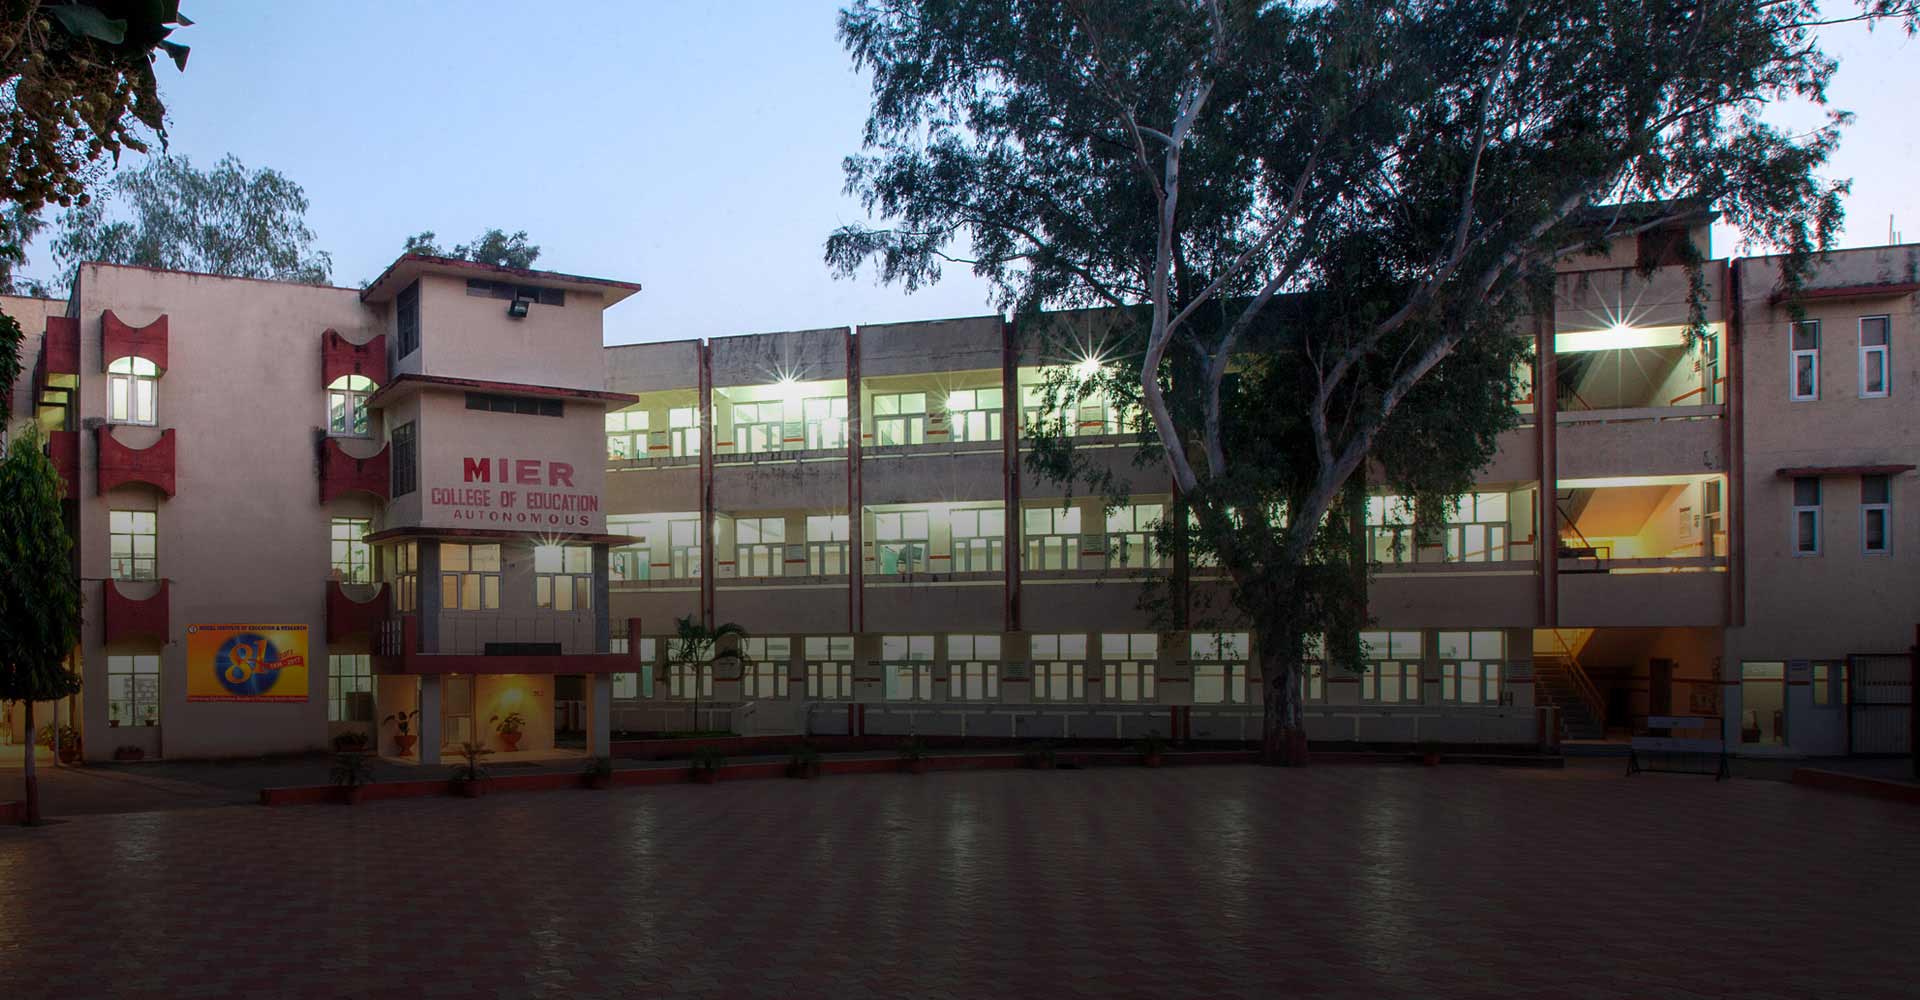 MIER College of Education